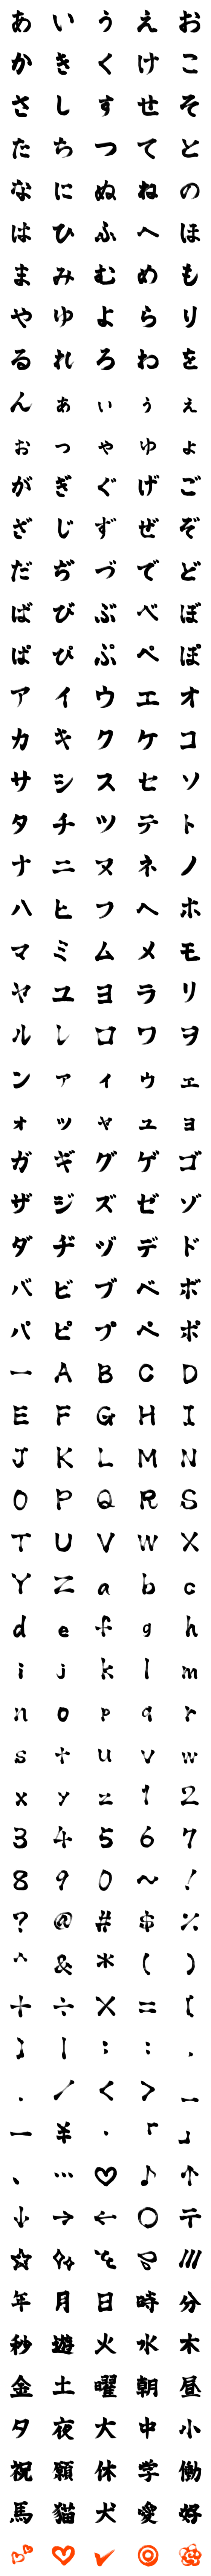 [LINE絵文字]趣のある絵文字 1の画像一覧